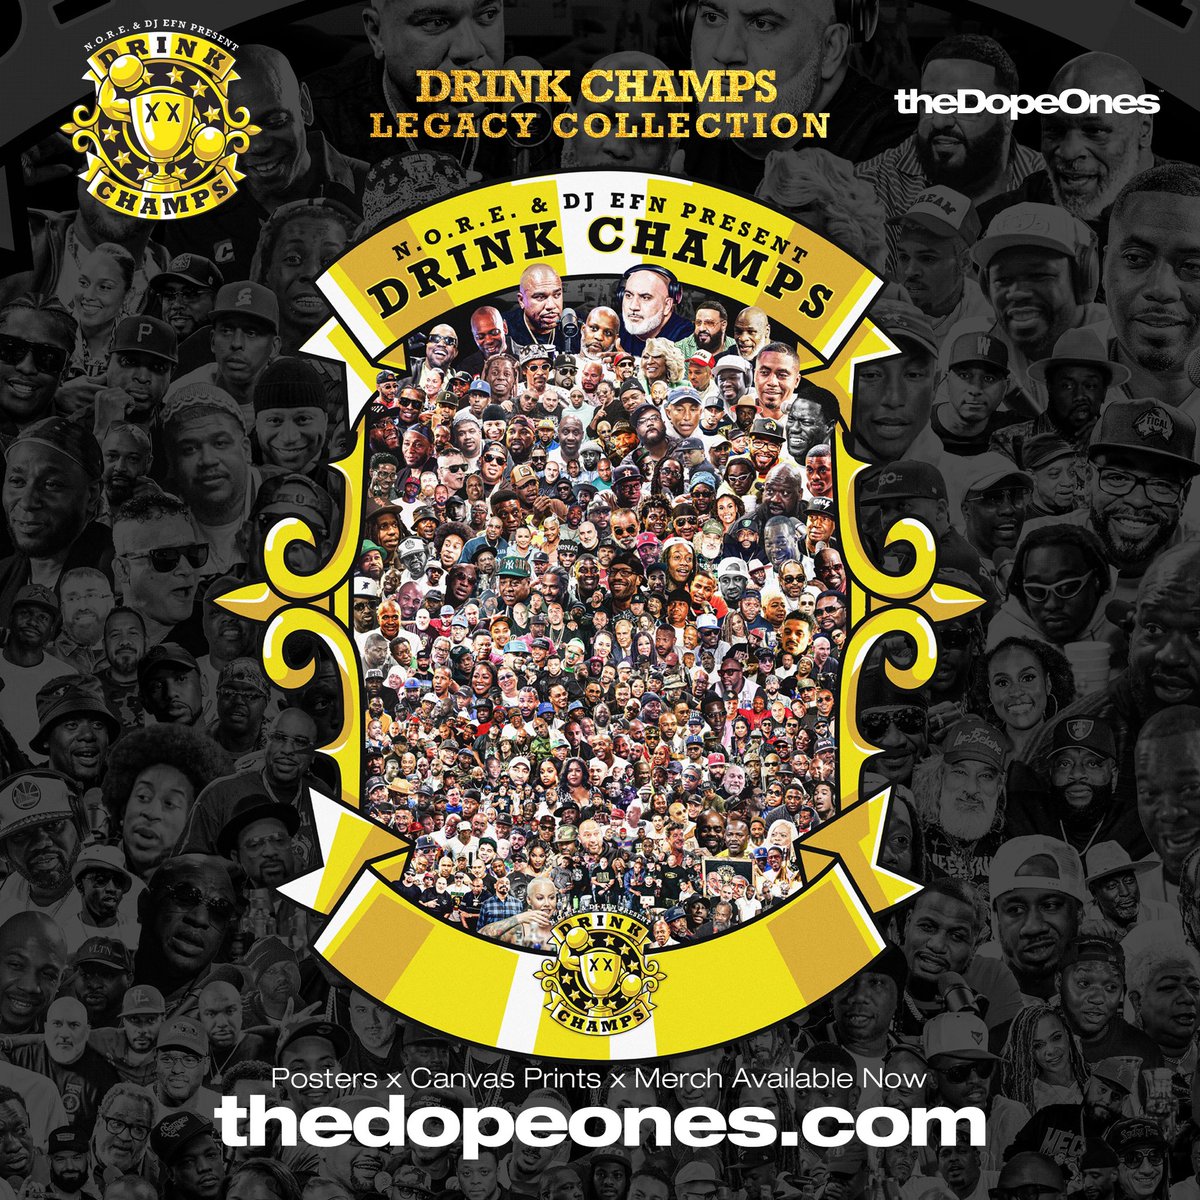 DRINK CHAMPS x theDopeOnes shopthedopeones.com